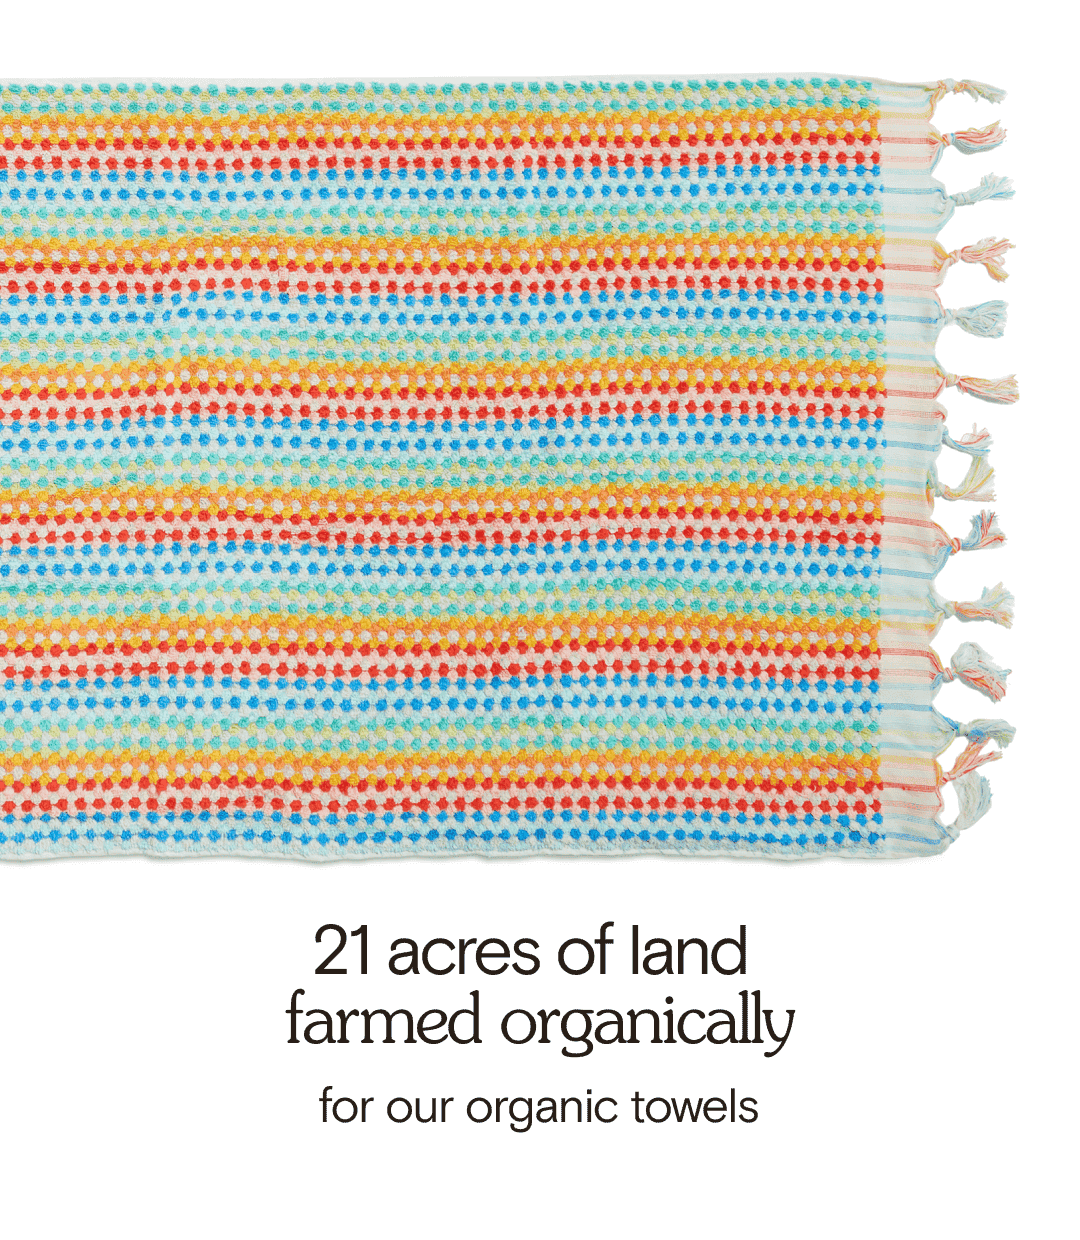 21 acres of land farmed organically for our organic towels